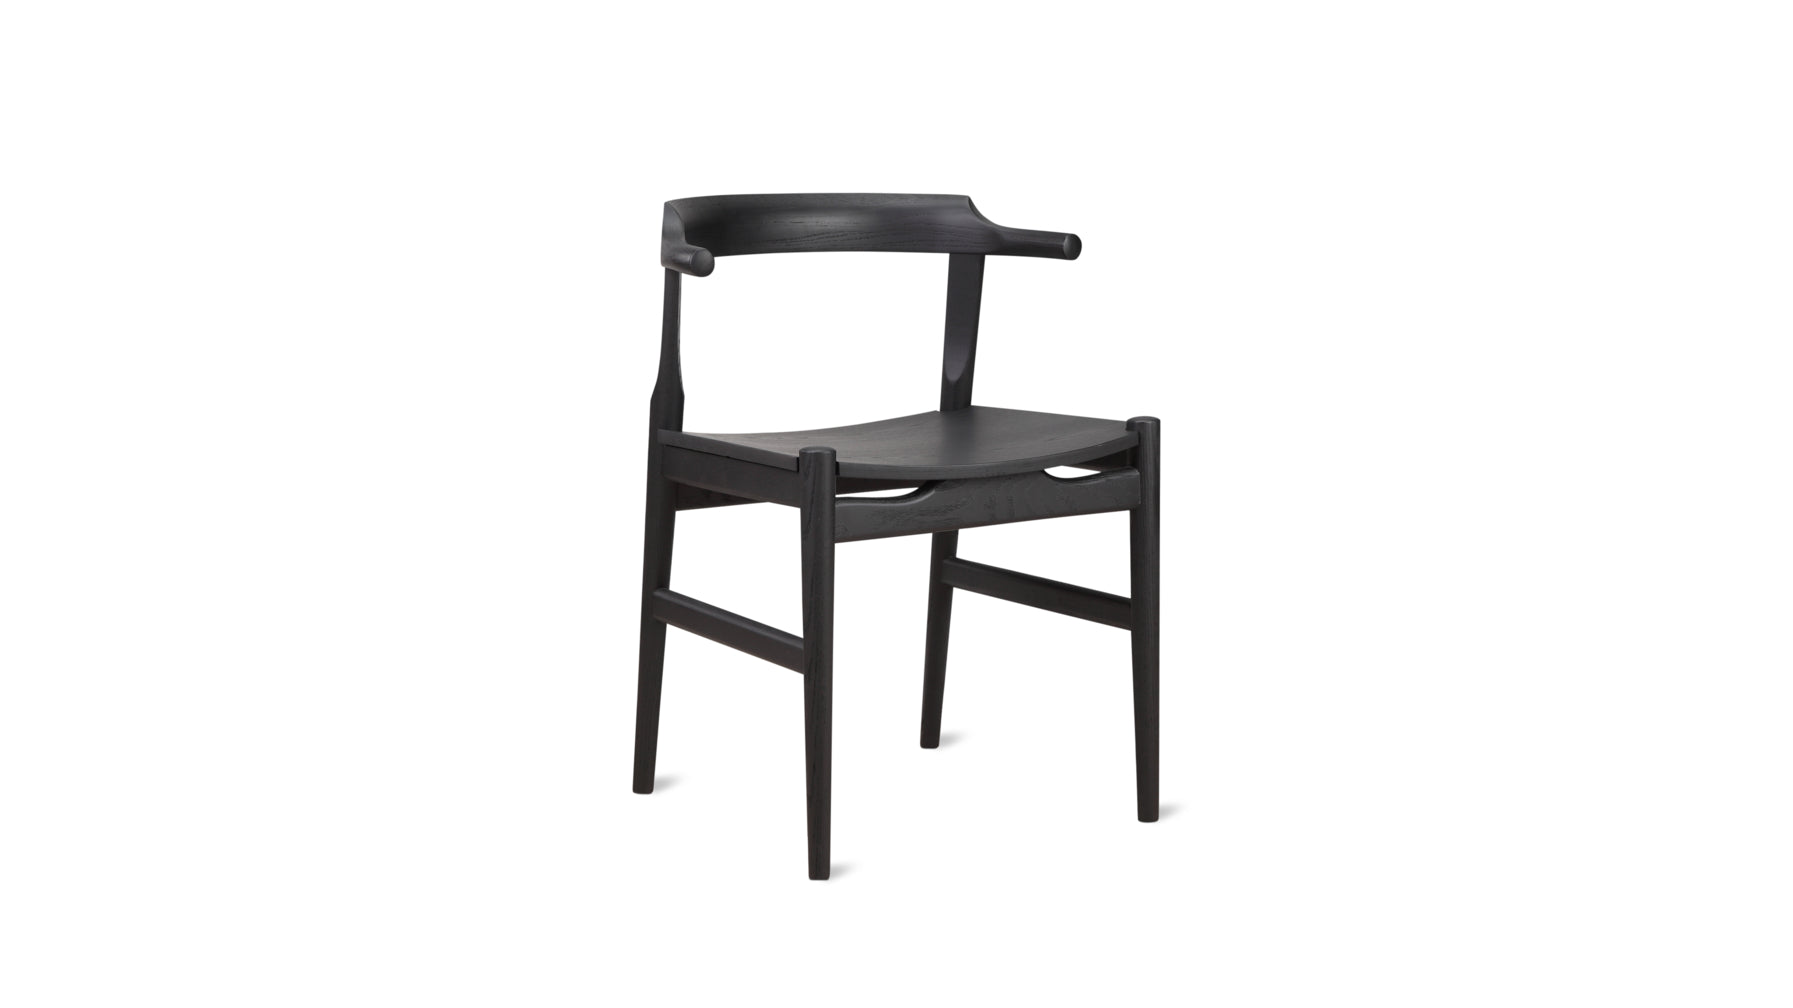 Tuck In Dining Chair, Black Ash, Wood Seat - Image 4